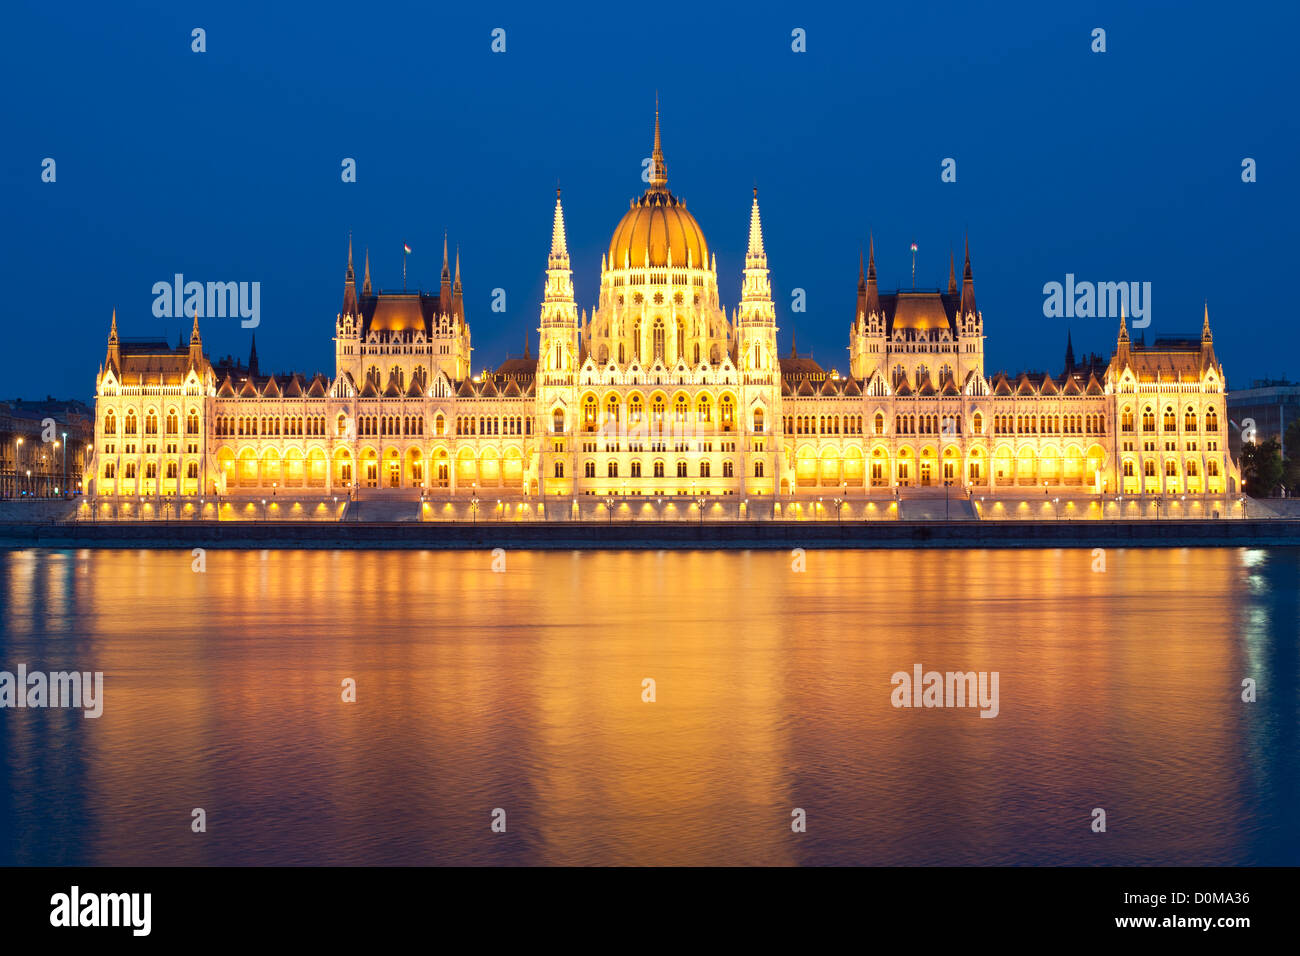 Dusk view of the Hungarian Parliament Building on the banks of the Danube River in Budapest, the capital of Hungary. Stock Photo